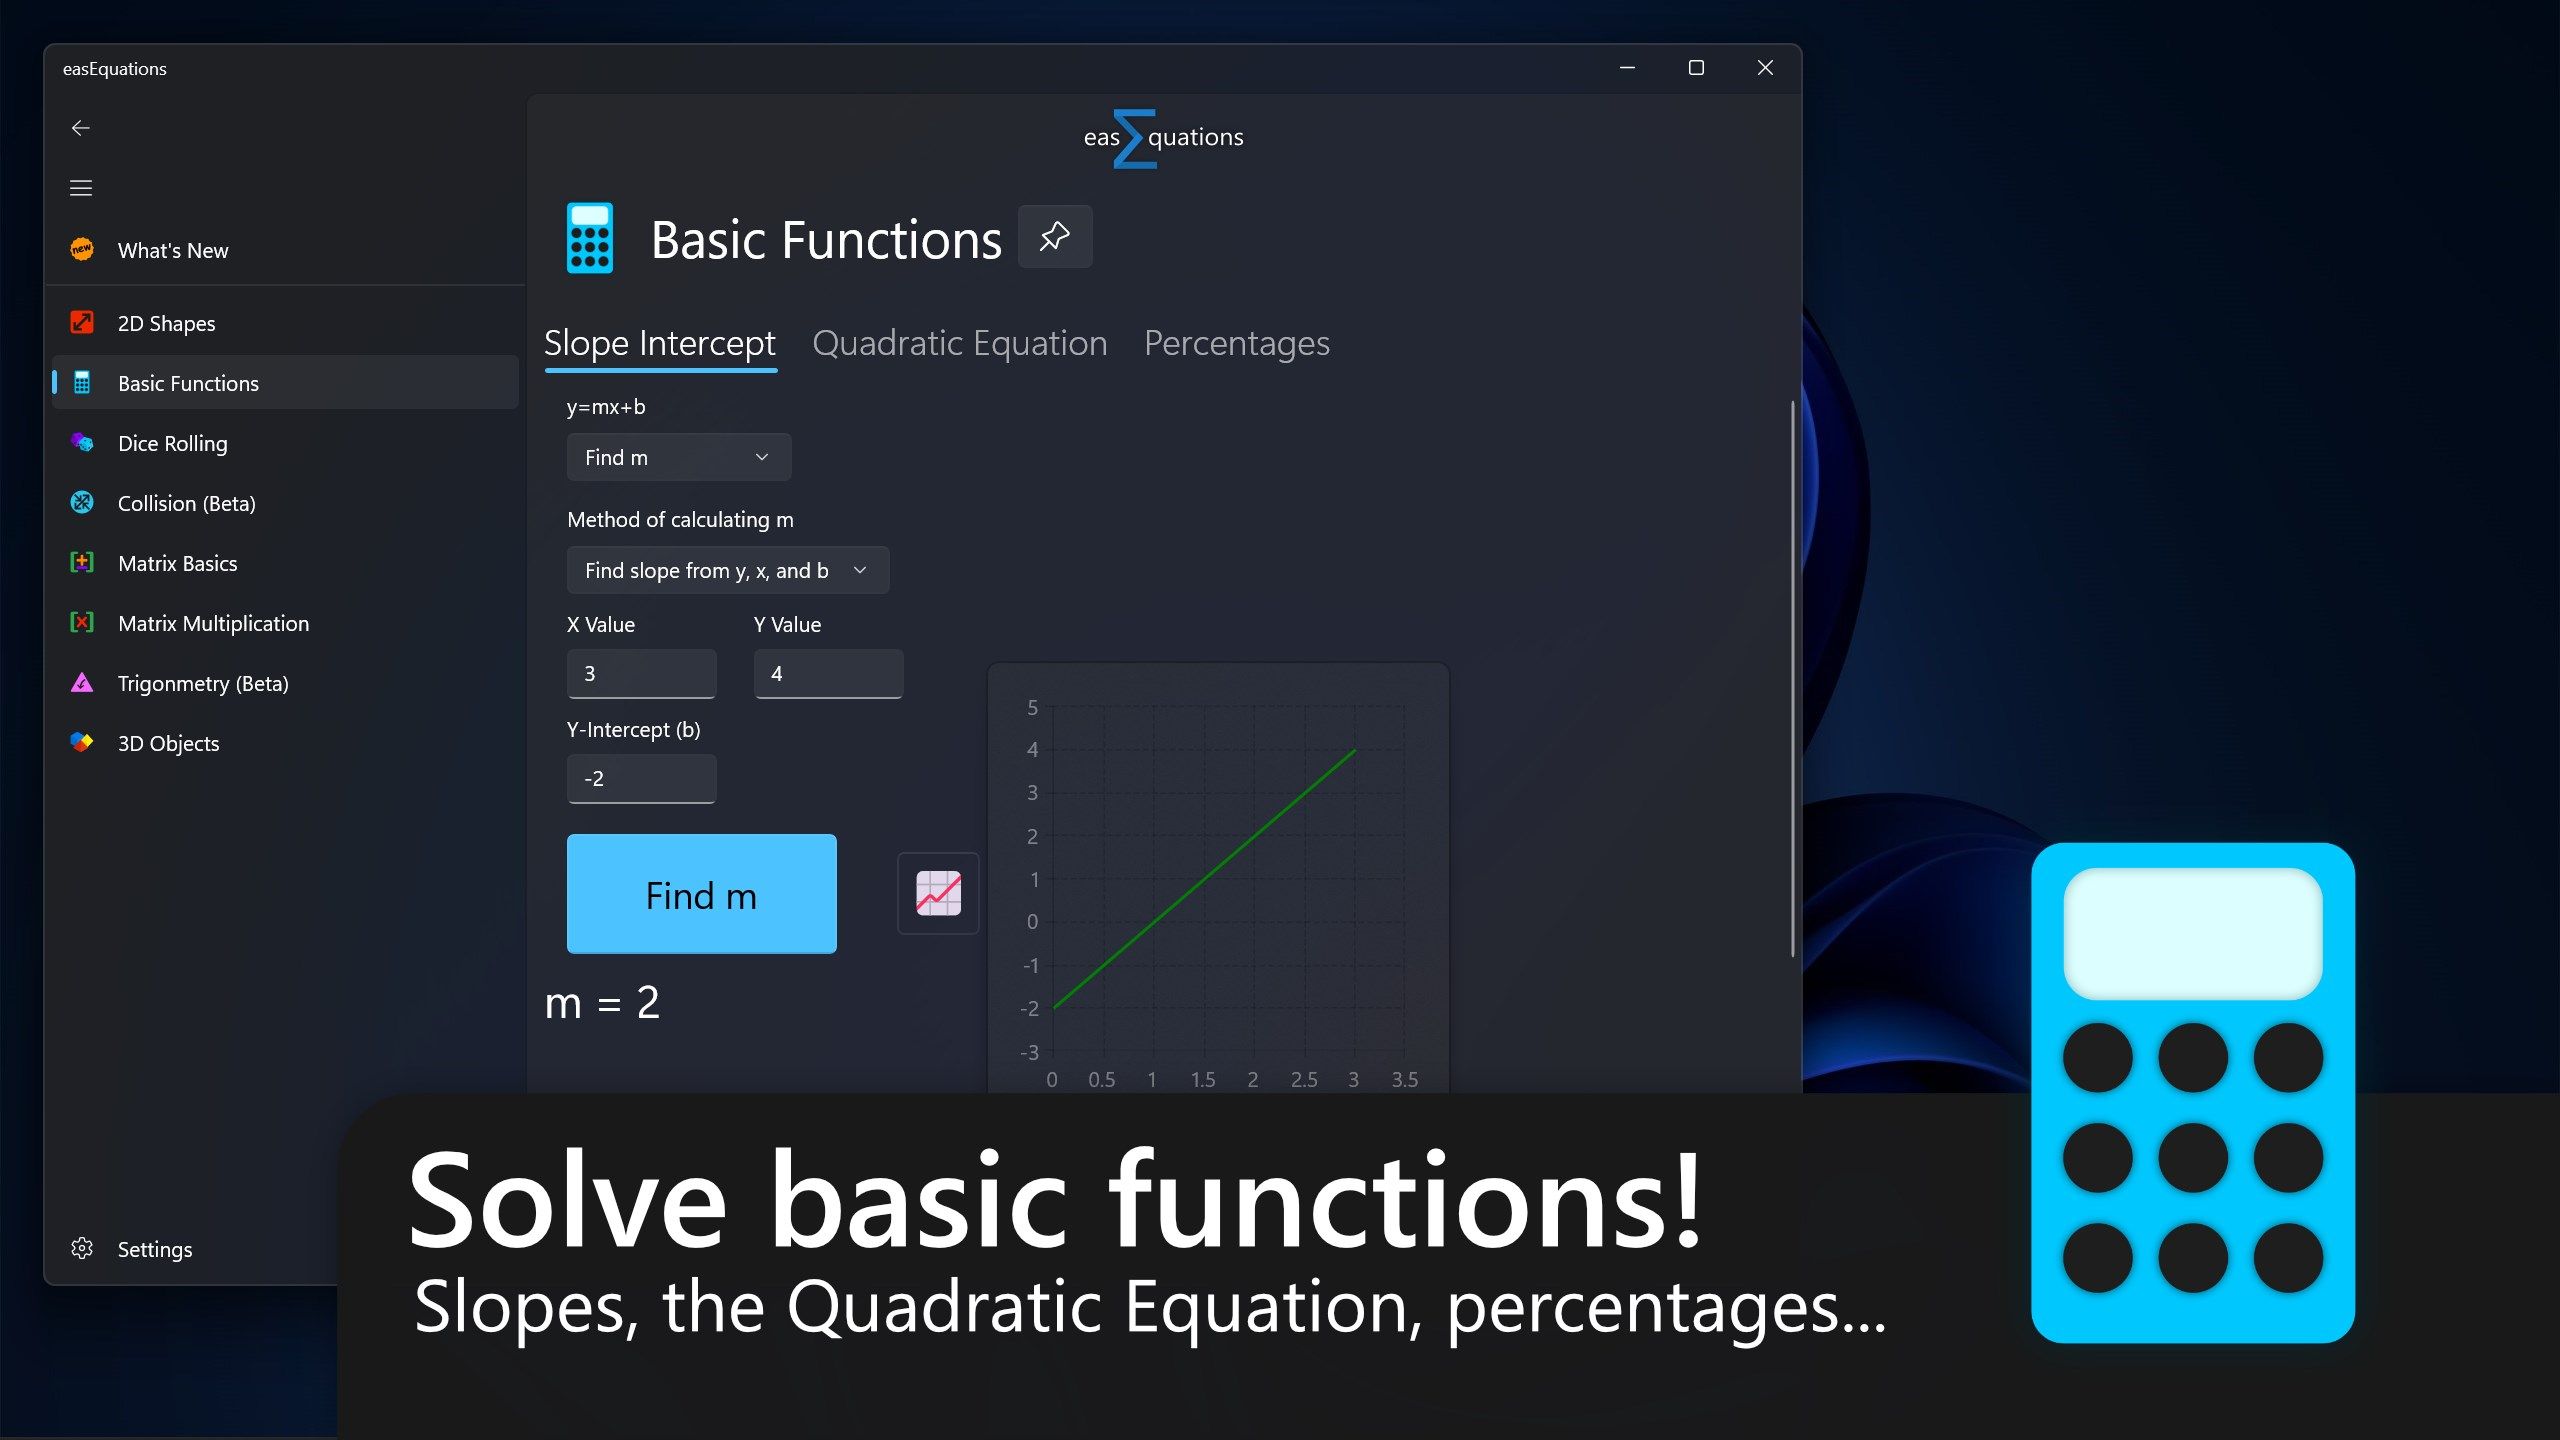 Solve basic functions, like y=mx+b, the quadratic equation, and percentages!